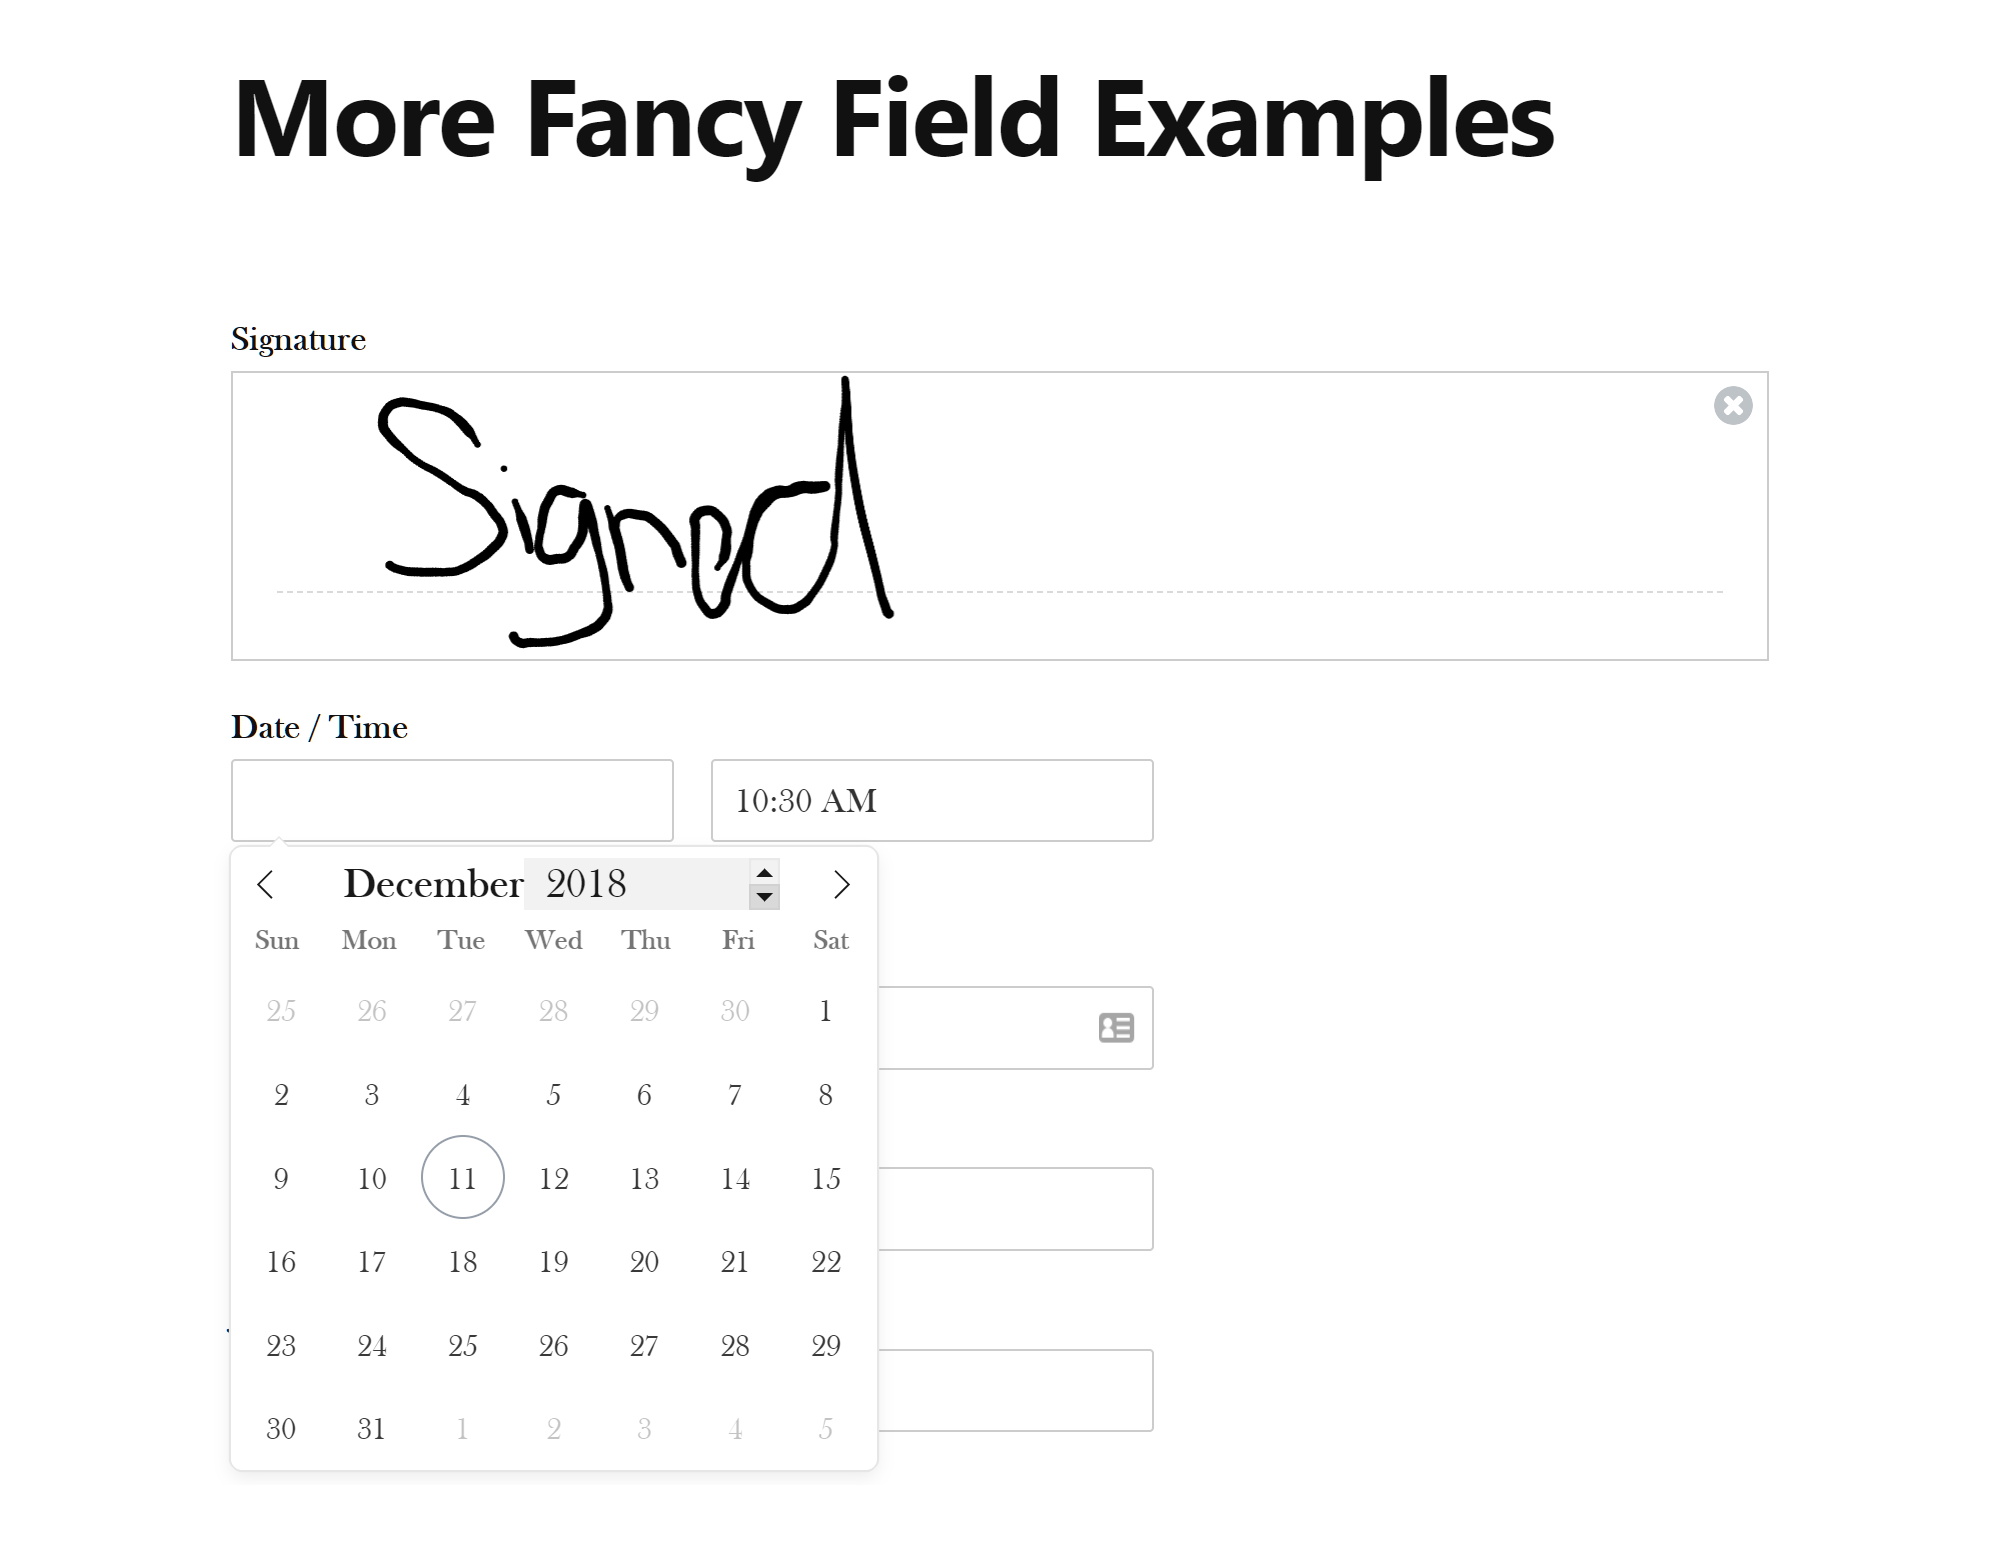 Signature and Date Picker Fields